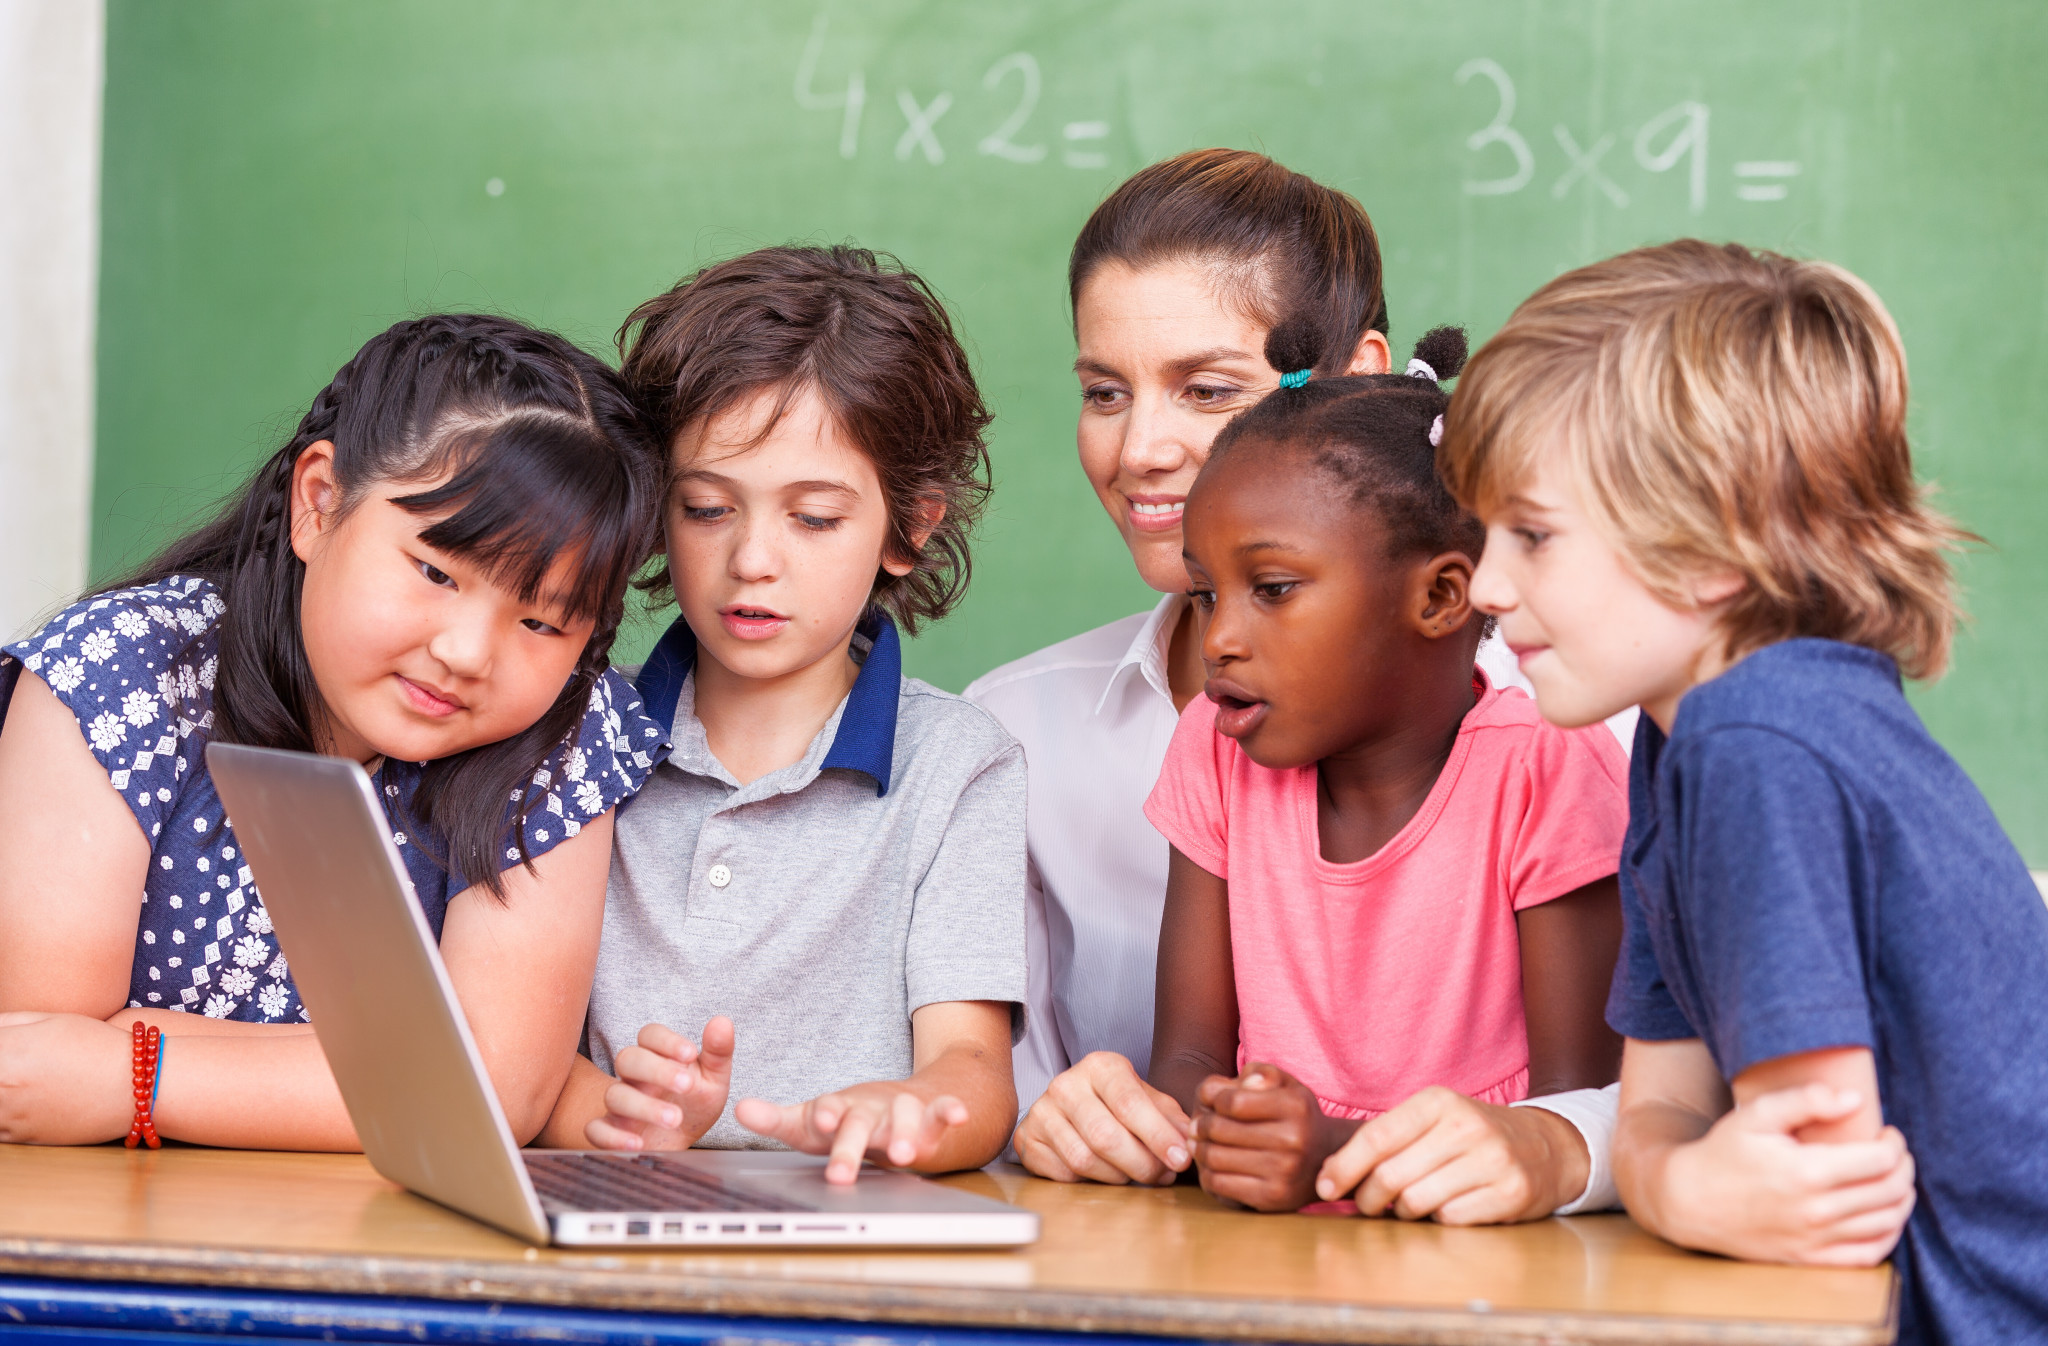 Young students huddled around a laptop